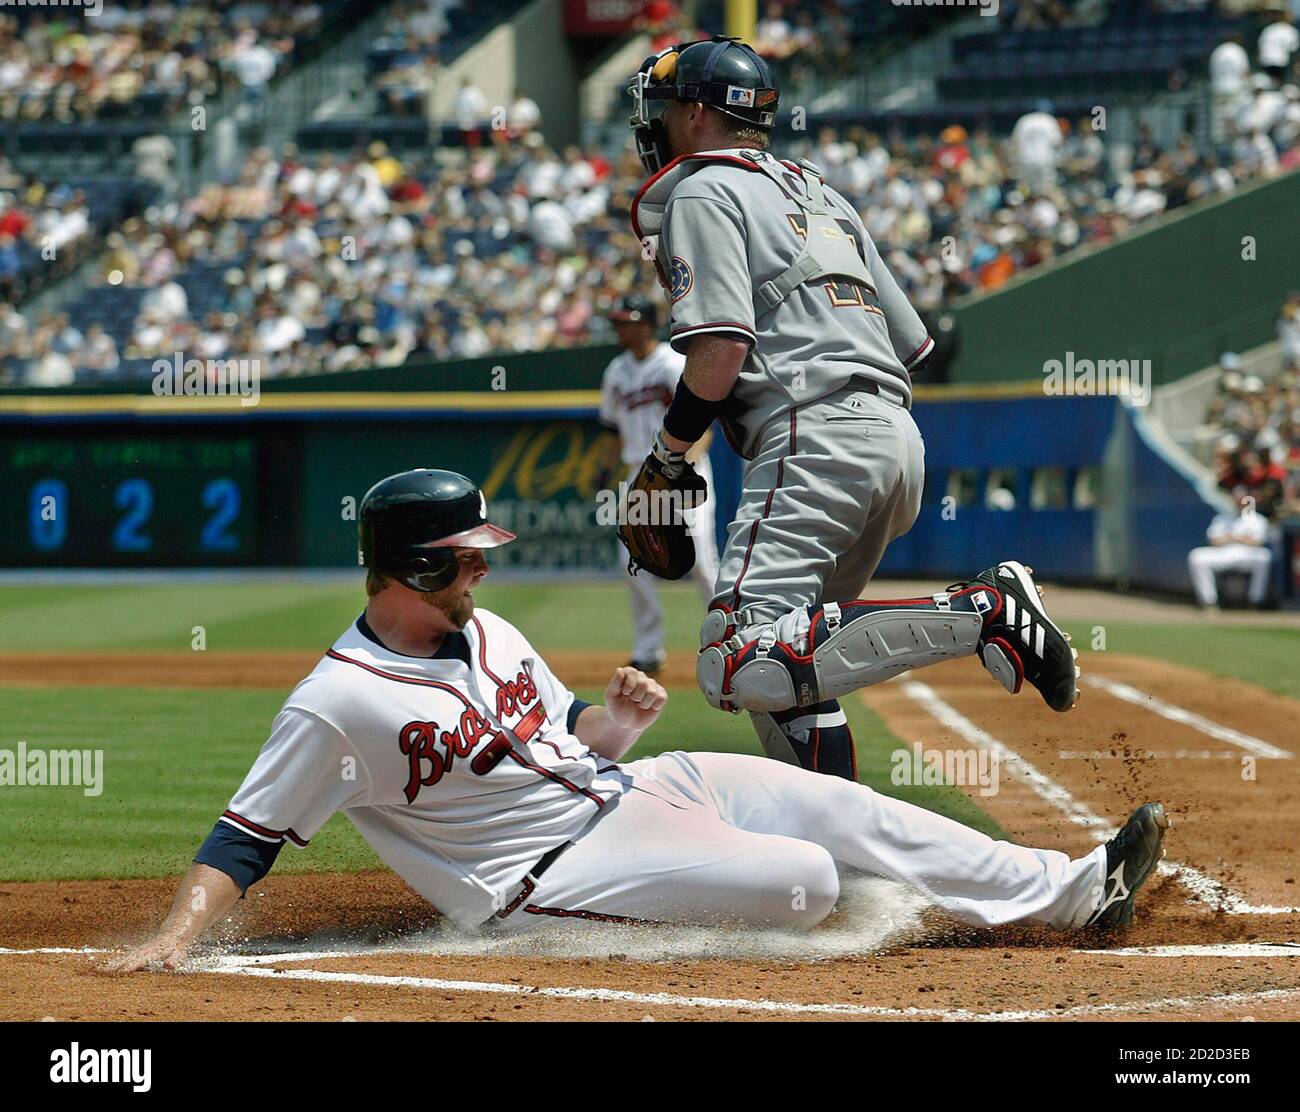 Atlanta Braves runner Brian McCann (L) slides into homeplate safely past Washington Nationals catcher Robert Fick in the first inning at their National League baseball game in Atlanta, Georgia, August 26, 2006.   REUTERS/Tami Chappell   (UNITED STATES) Stock Photo